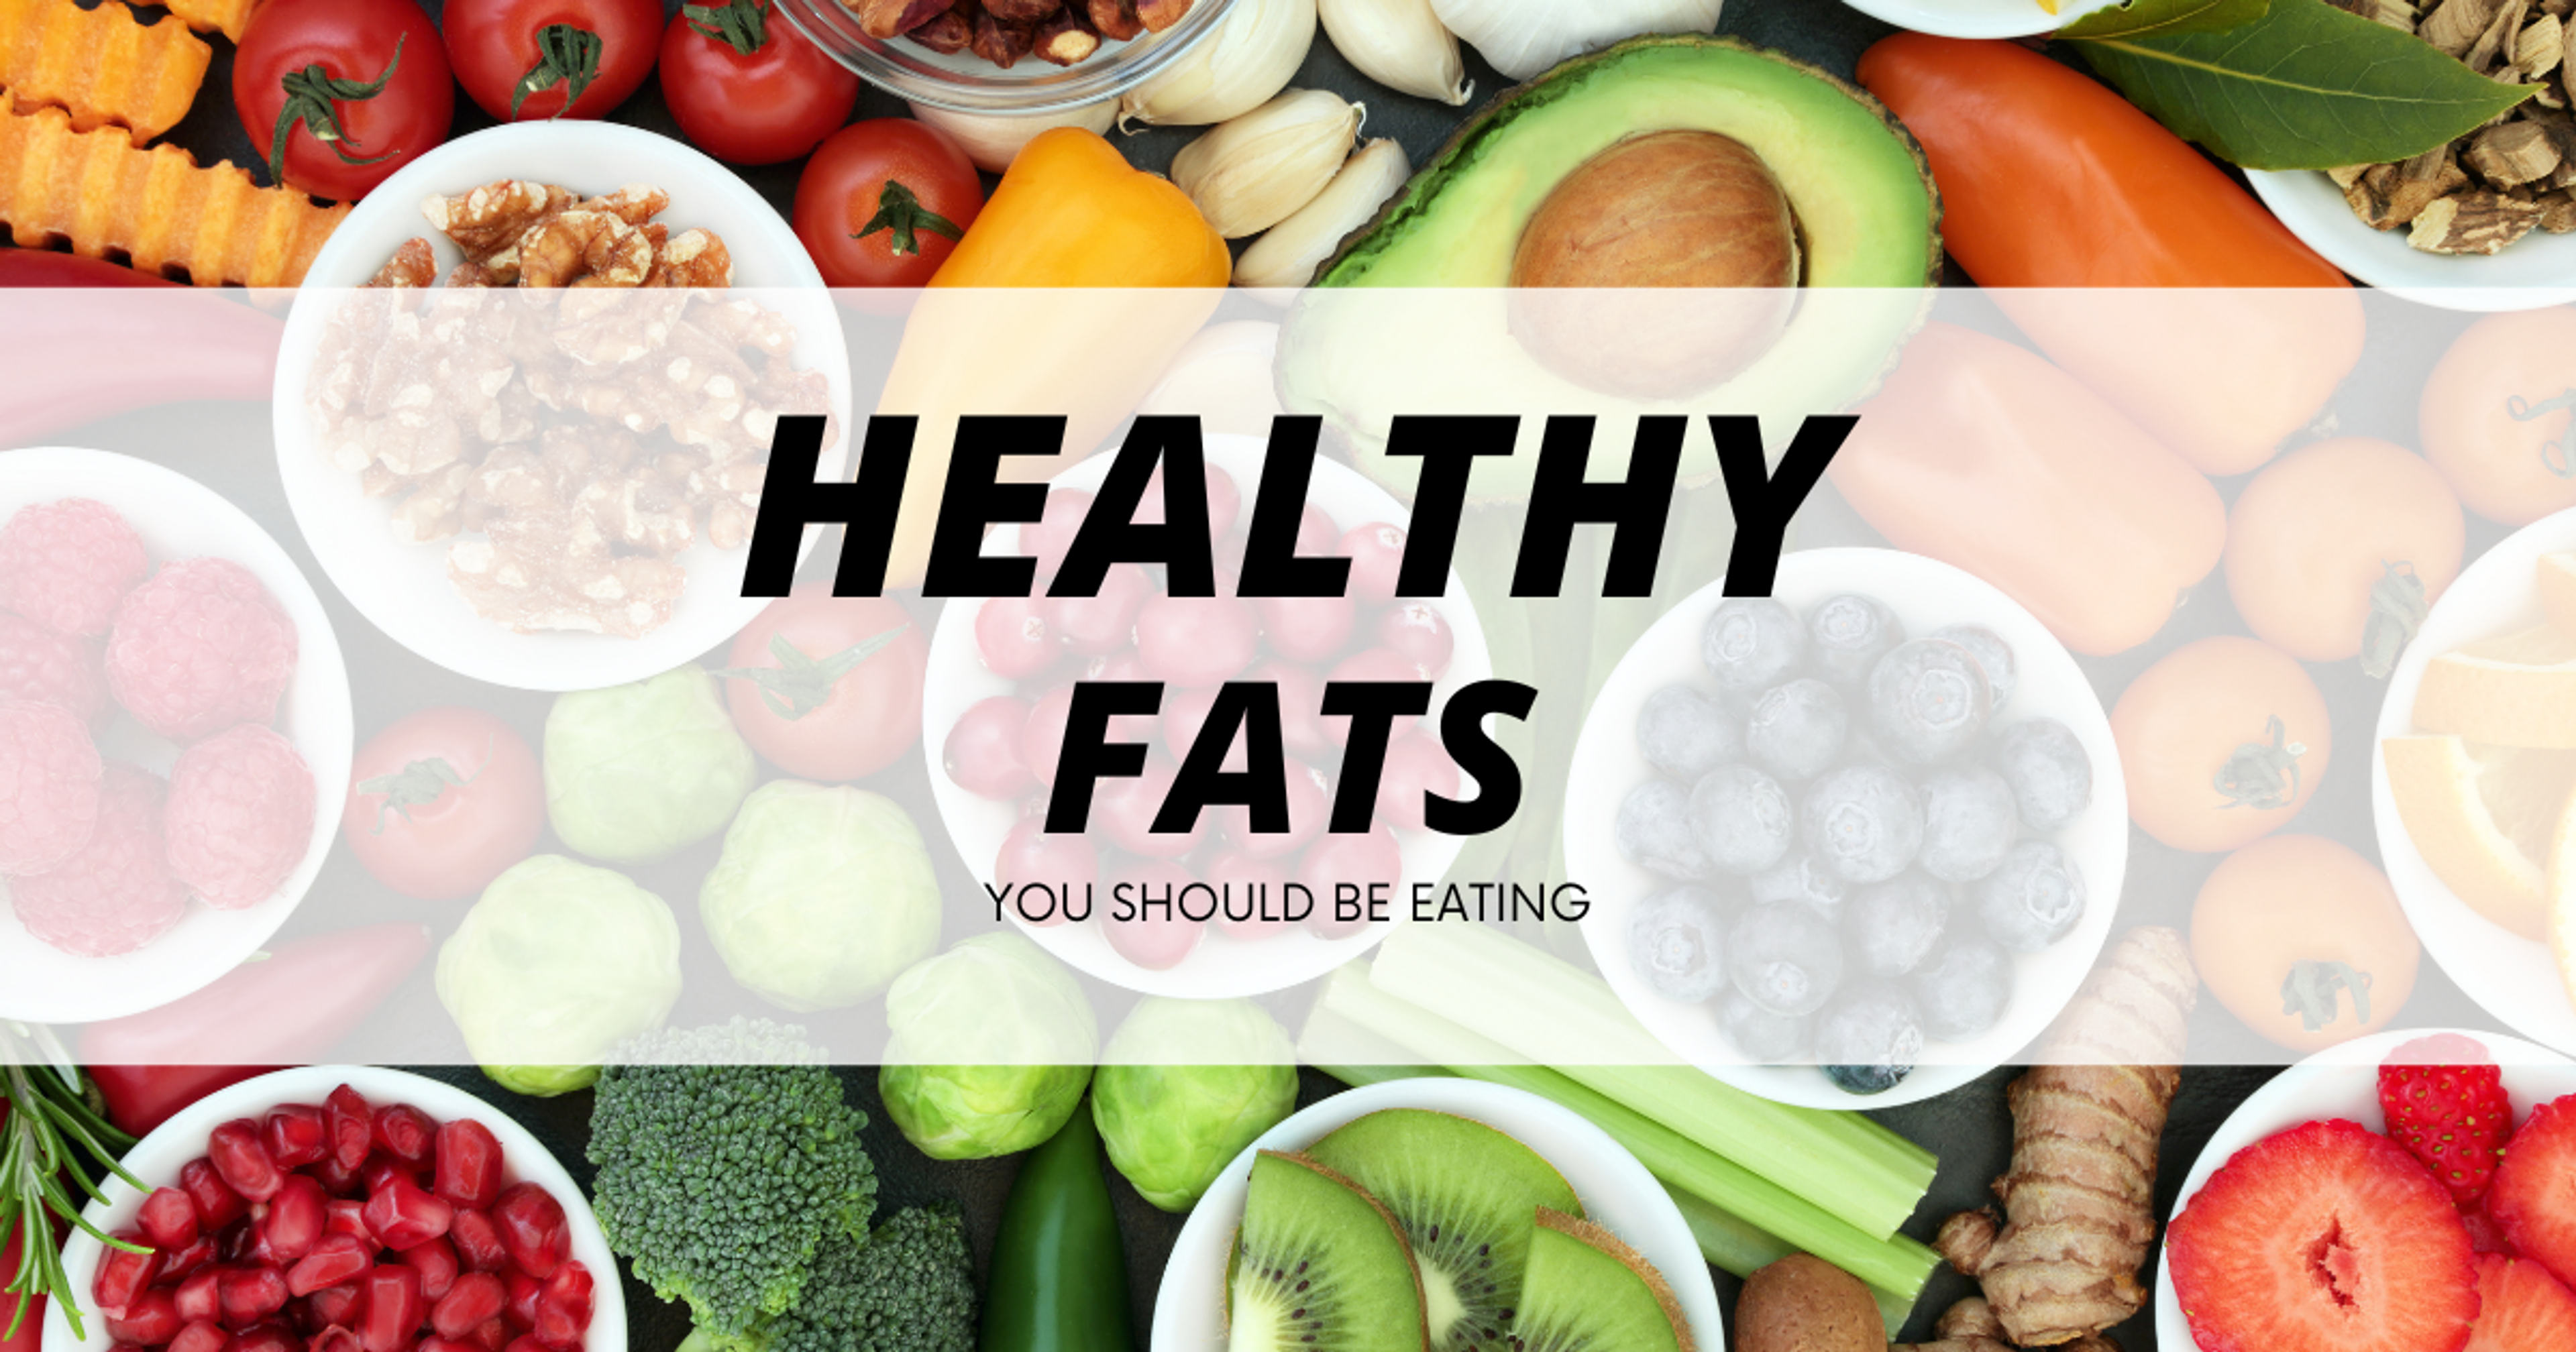 The Healthy Fats You Should Be Eating